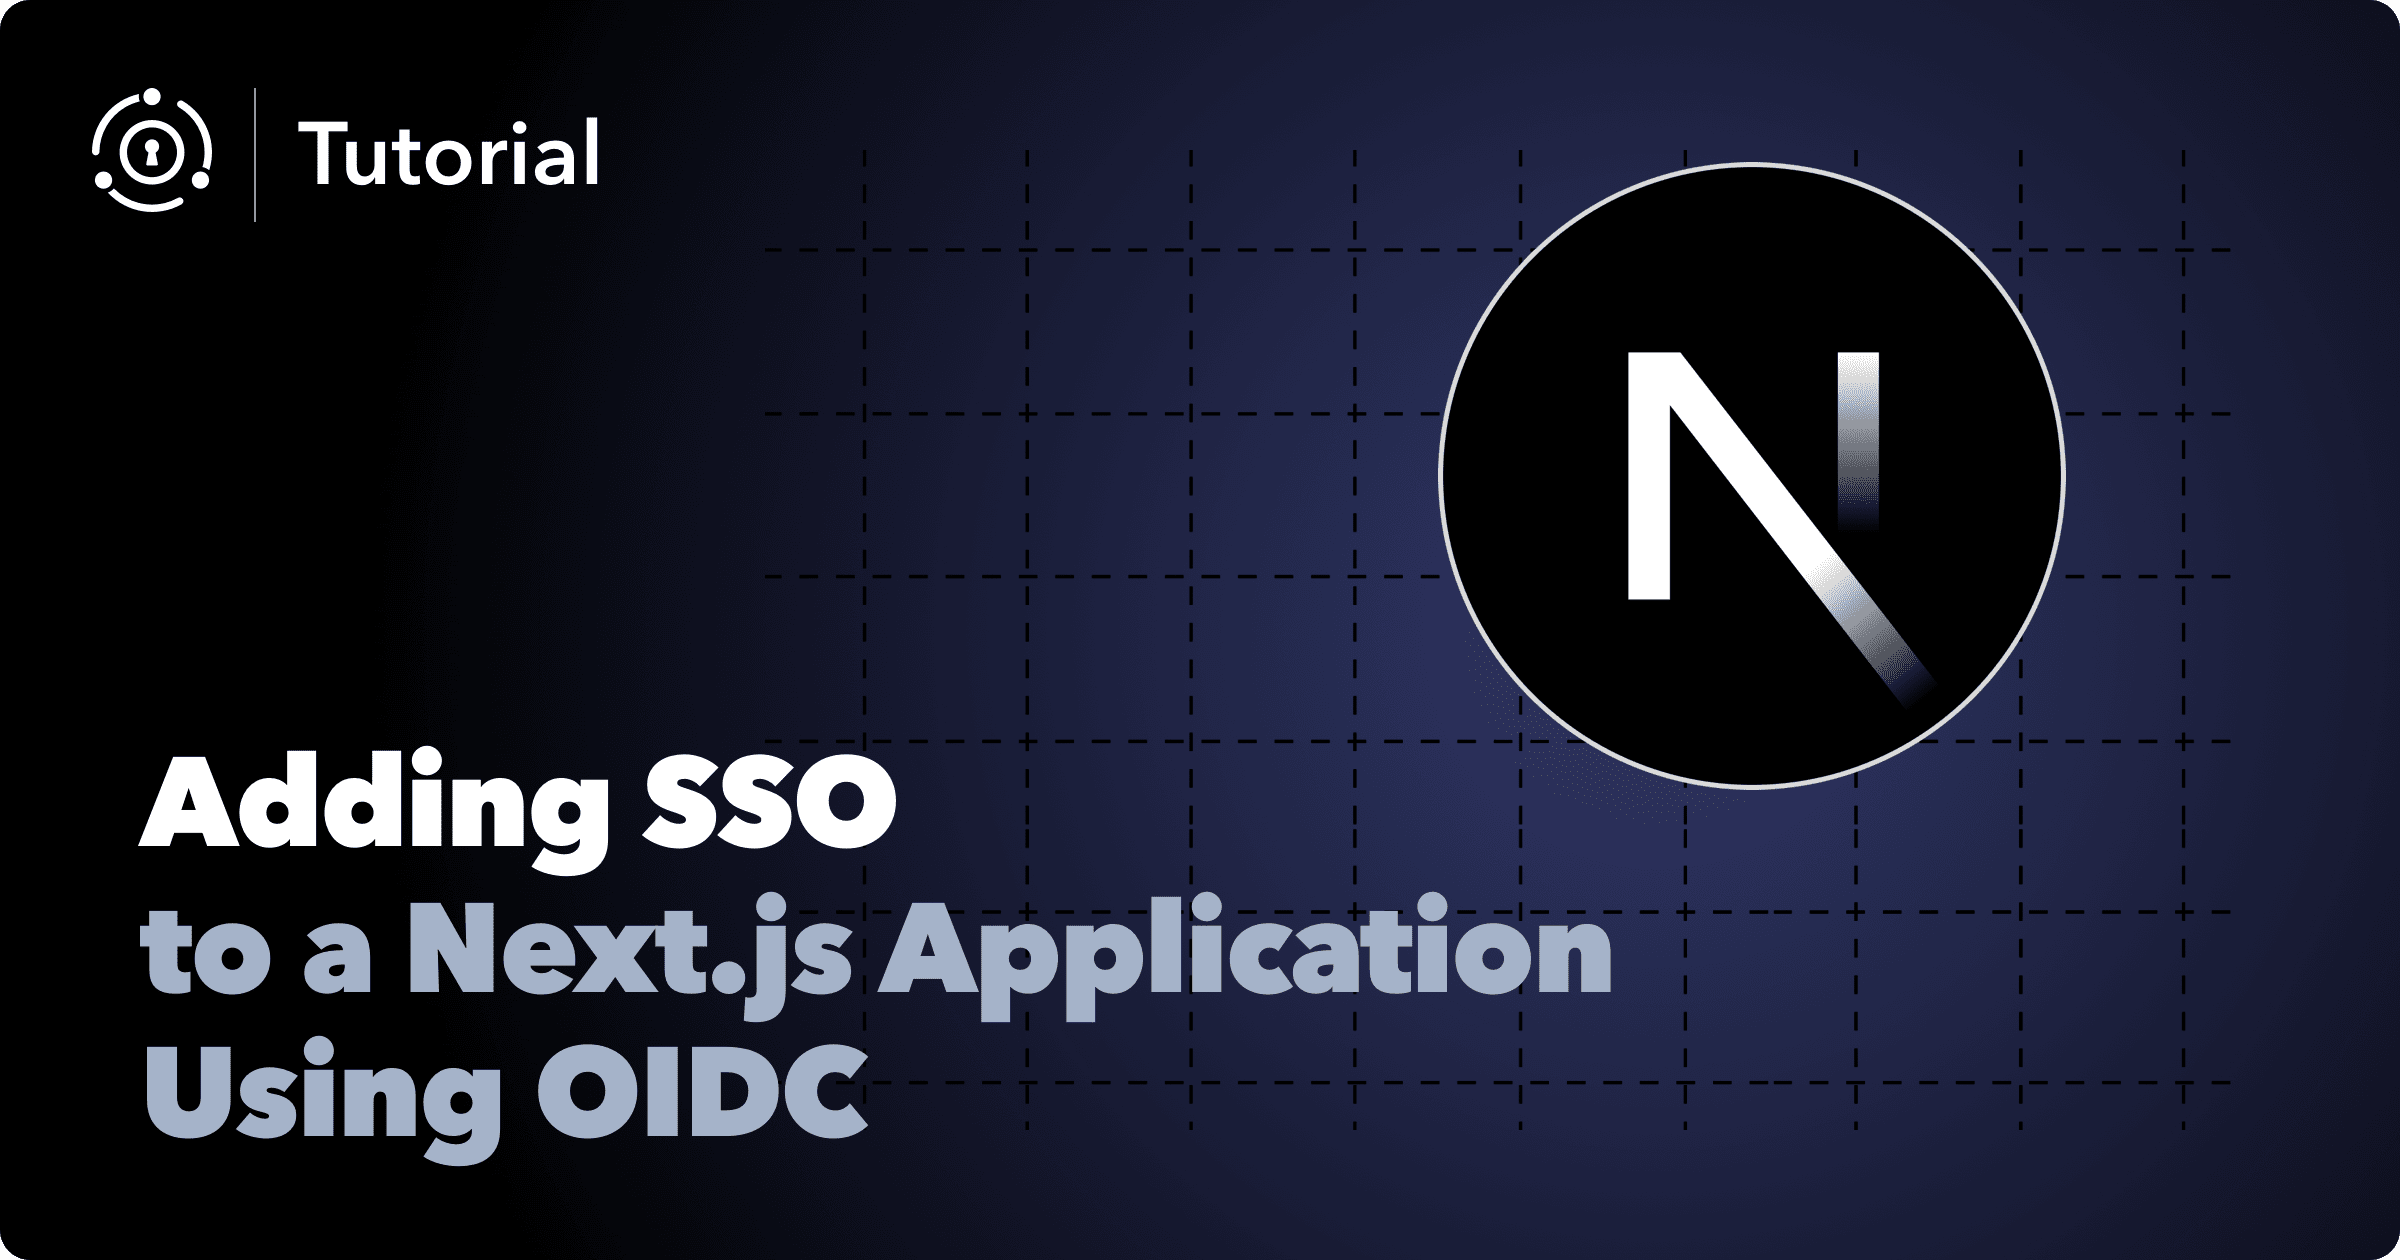 Adding single sign-on to a Next.js app using OIDC